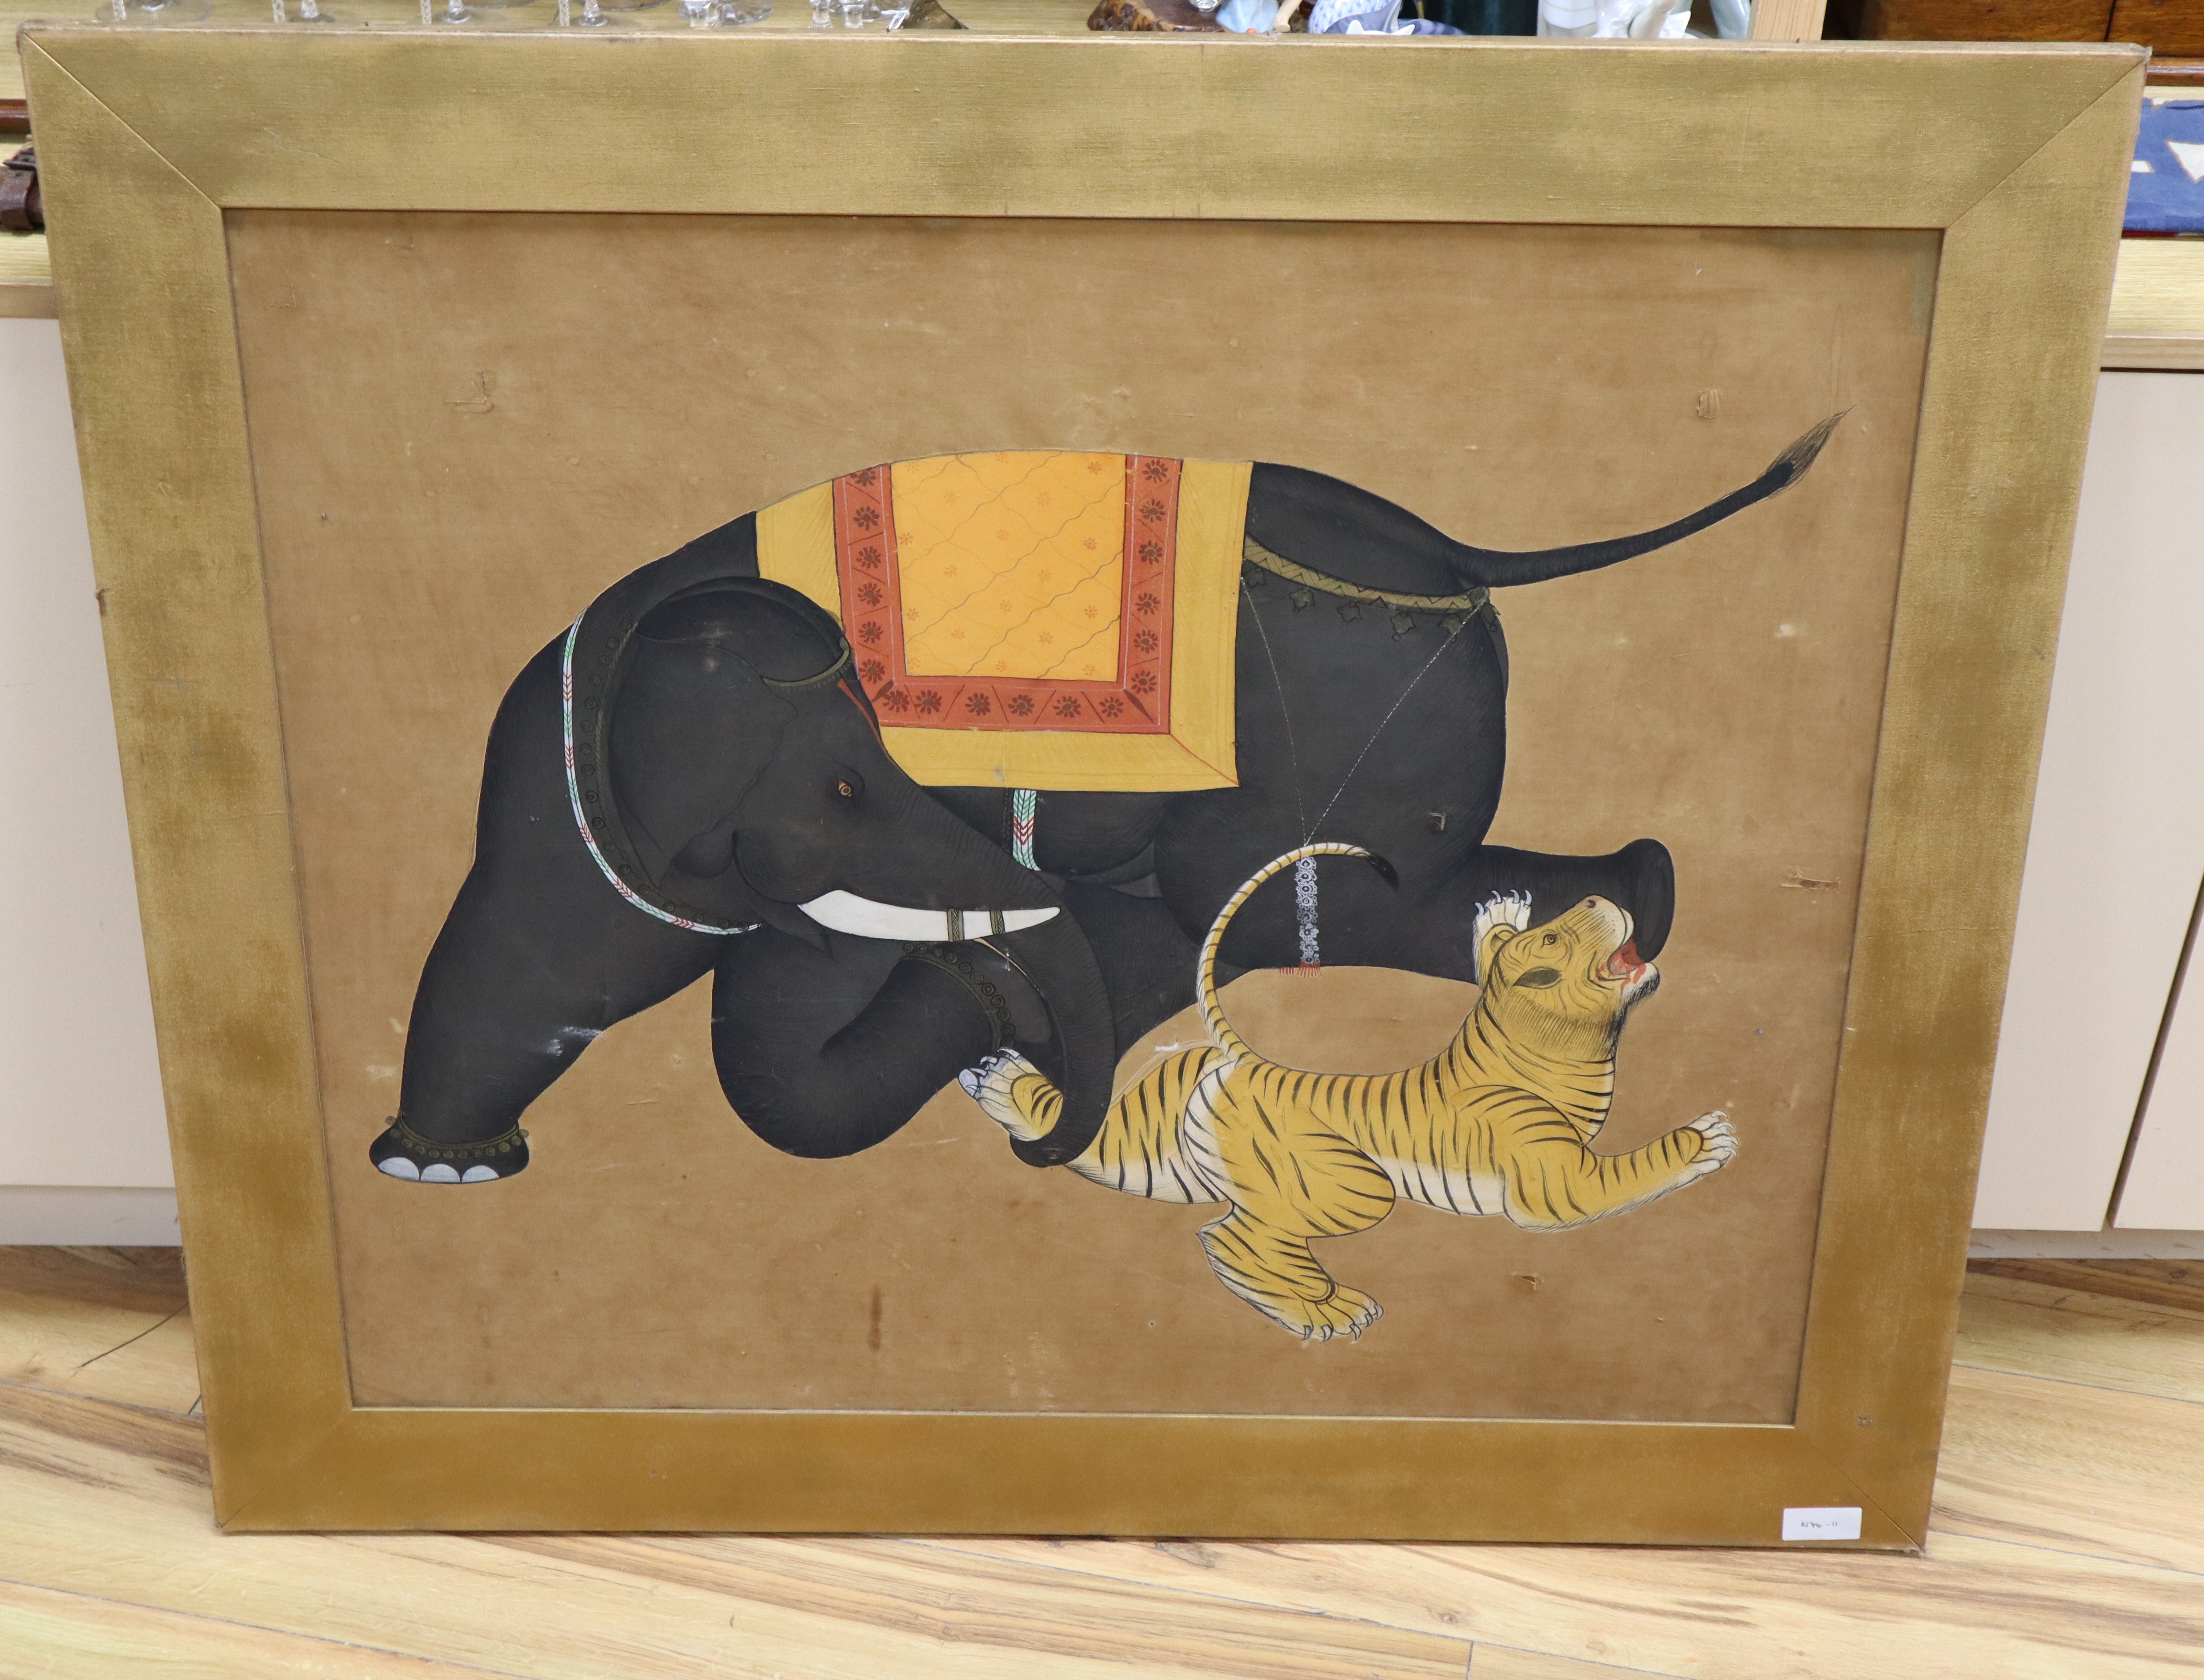 Indian School, oil on silk, Elephant attacking a tiger, 79 x 94cm